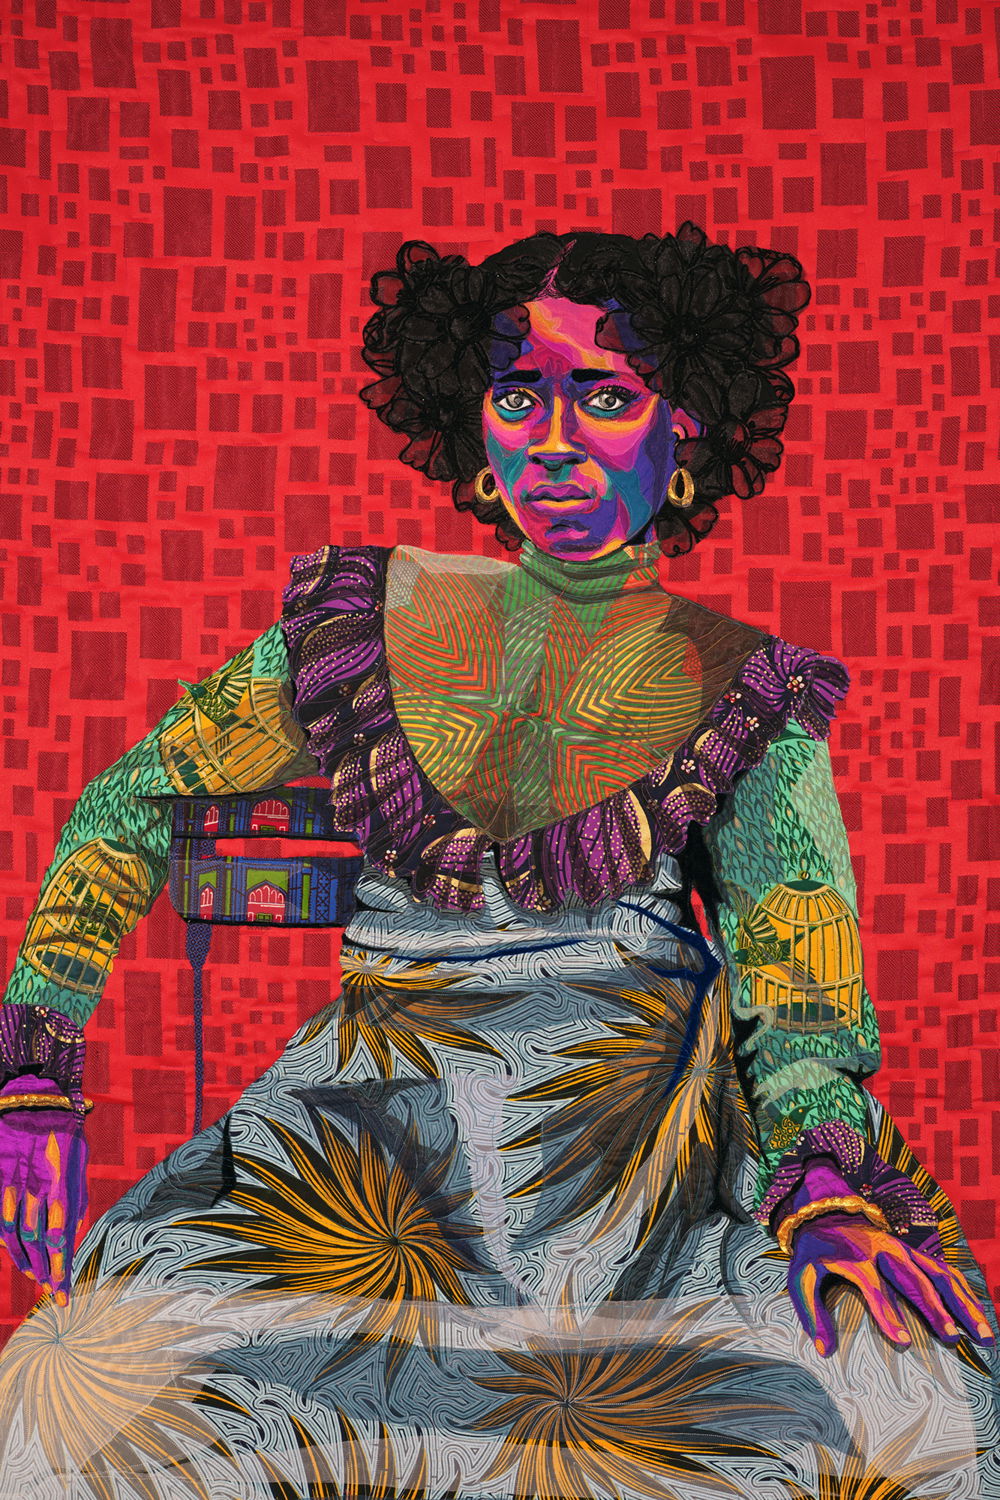 An African American woman sits back in a sleeved Victorian dress with black flowers in her hair, backdropped by a red geometric pattern. She gazes concernedly, her skin depicted with magenta, purple, teal, and yellow and her attire with vibrant, clashing patterns